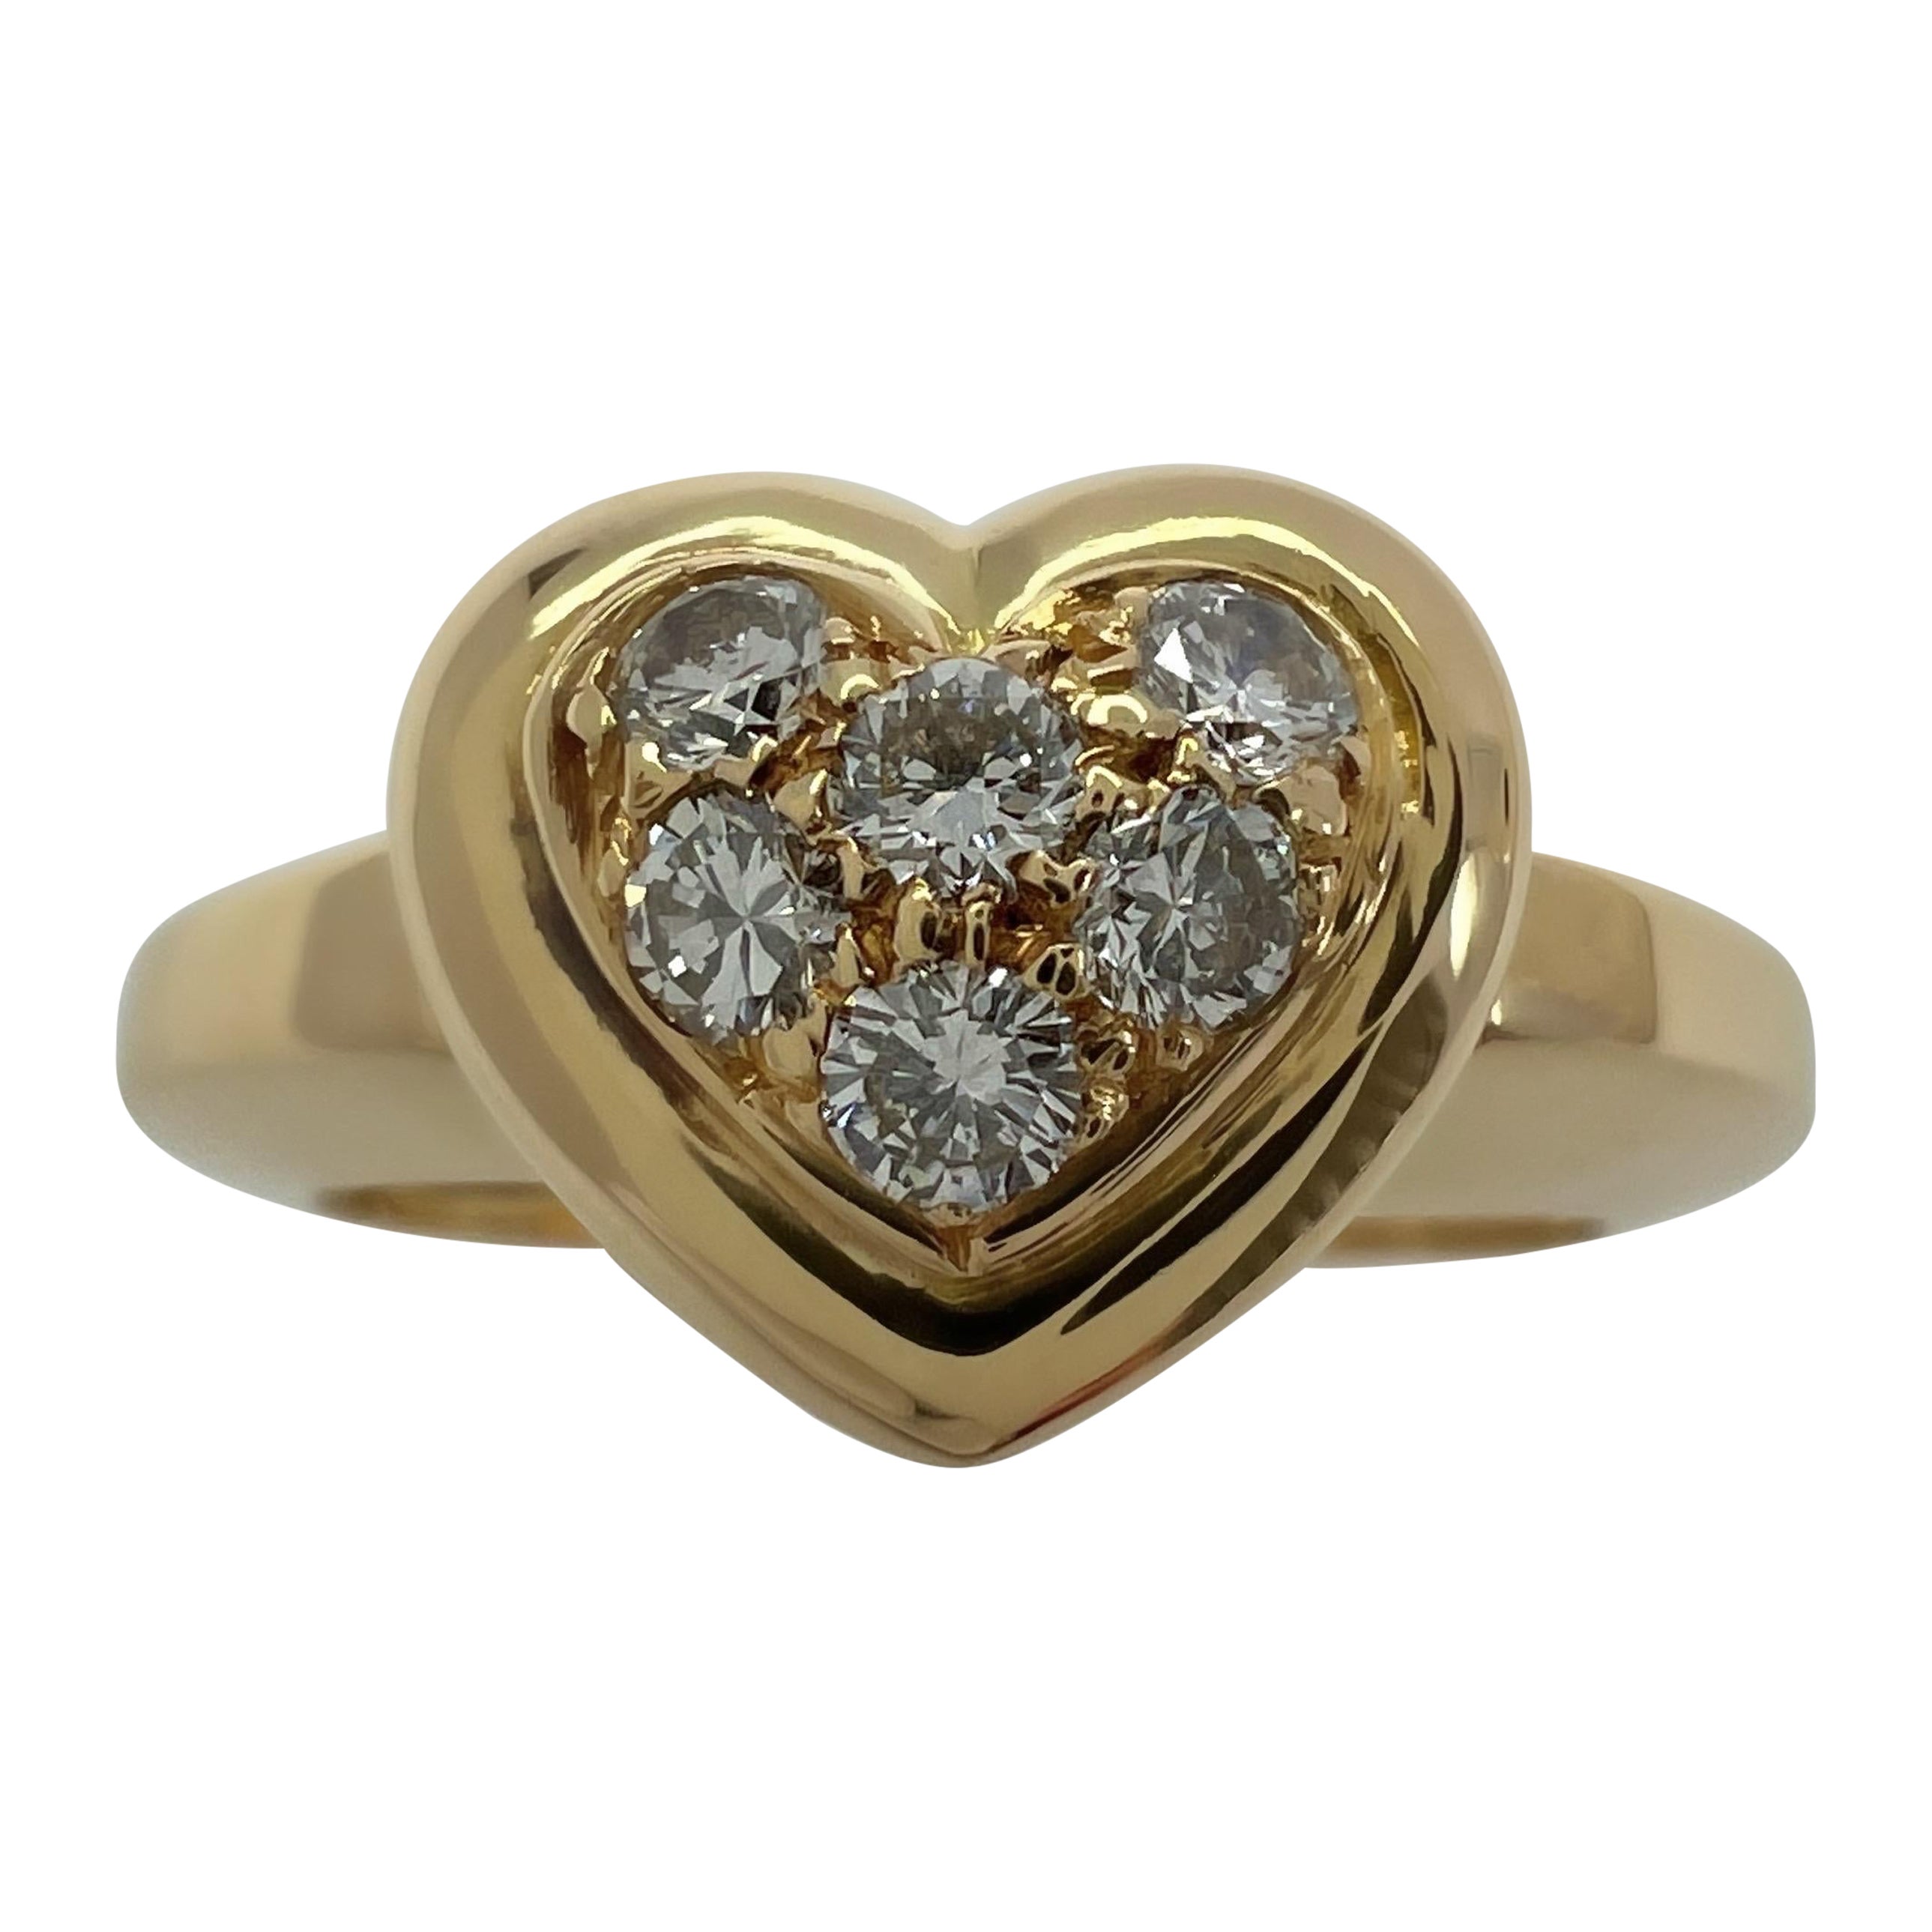 Rare Vintage Van Cleef & Arpels 18k Yellow Gold Diamond Heart Ring And Pendant For Sale